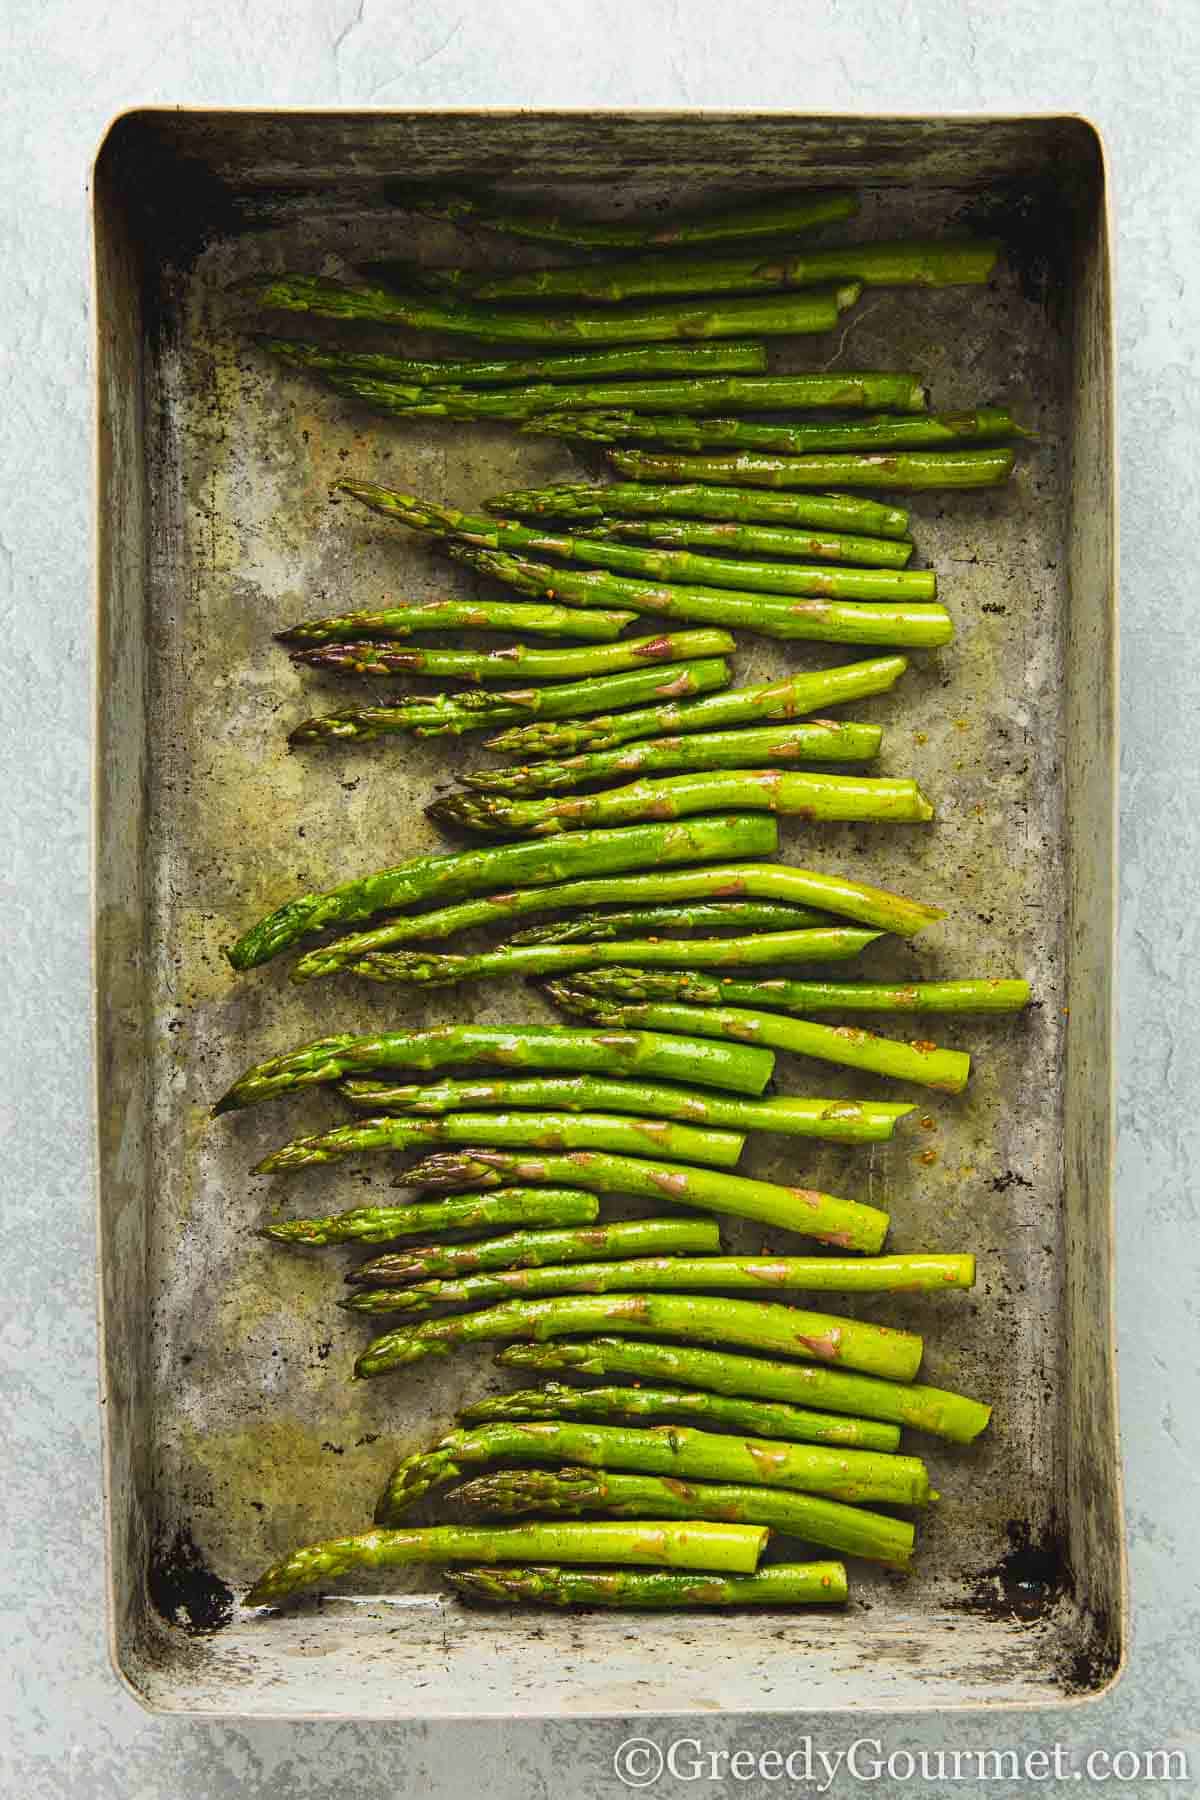 Roasted asparagus in a pan.